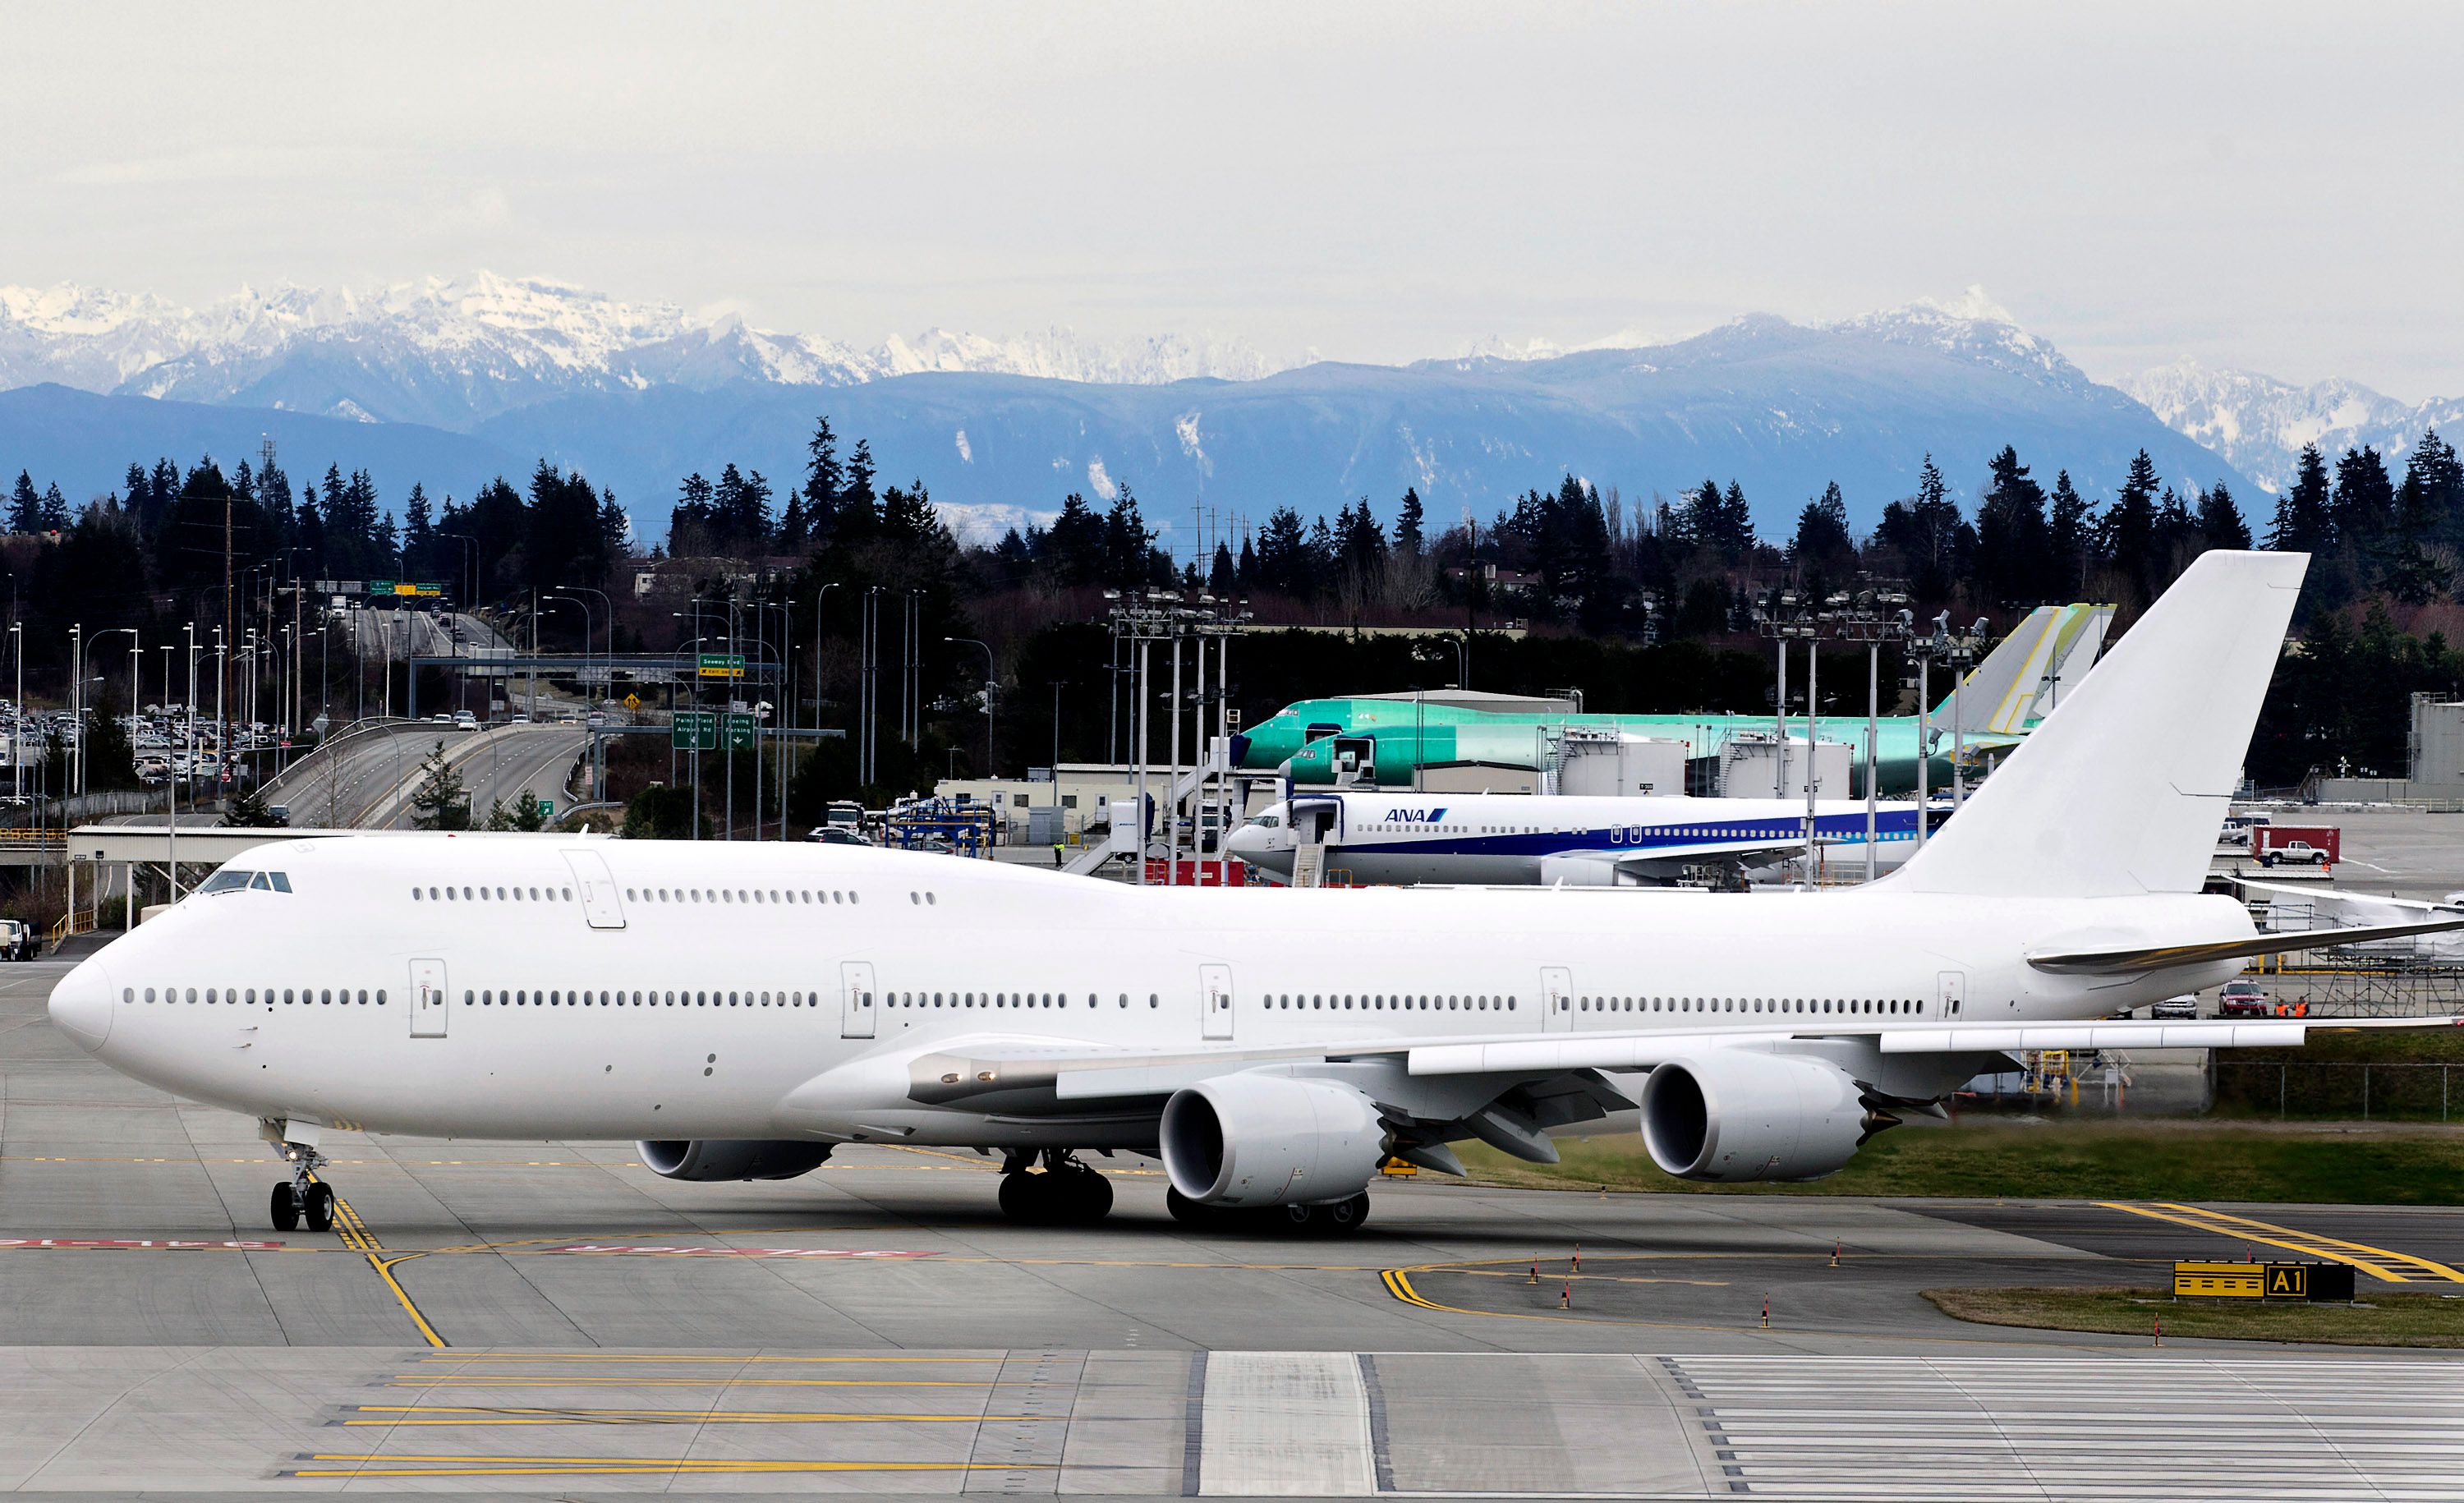 A Boeing 747-8 Intercontinental airliner which will be delivered to an undisclosed VIP customer, taxis before taking off at the Paine Field February 28, 2012 in Everett, Washington